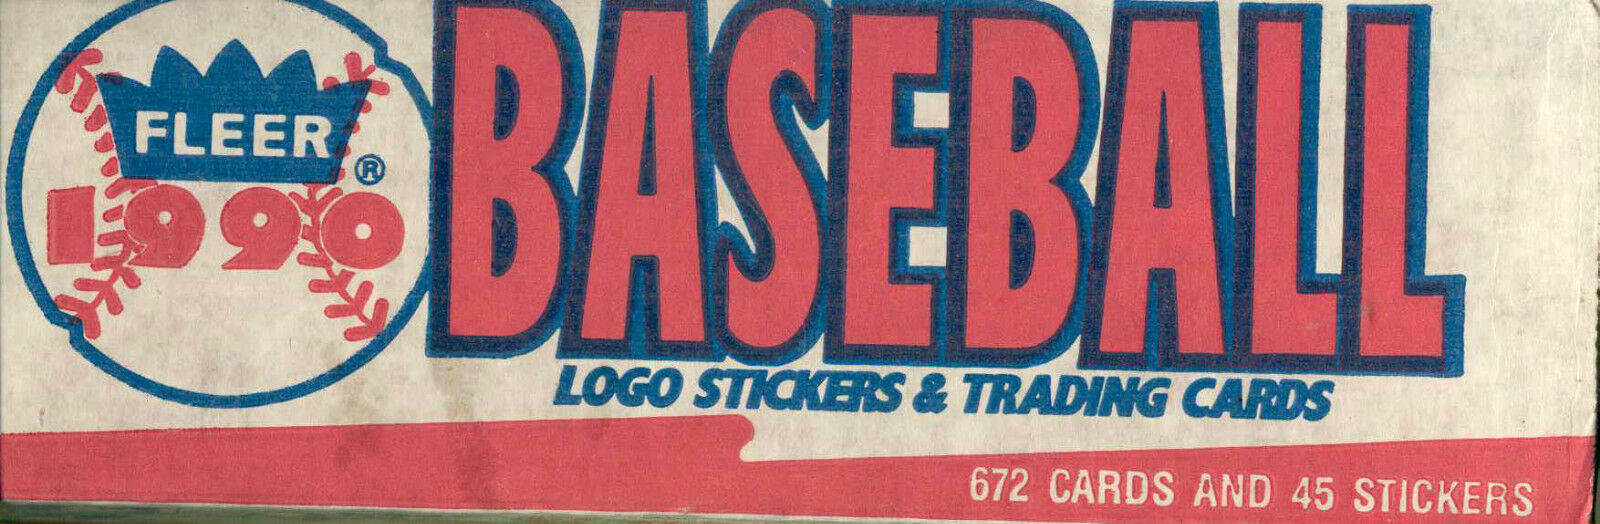 1990 FLEER BASEBALL SET LOGO STICKERS AND TRADING CARDS